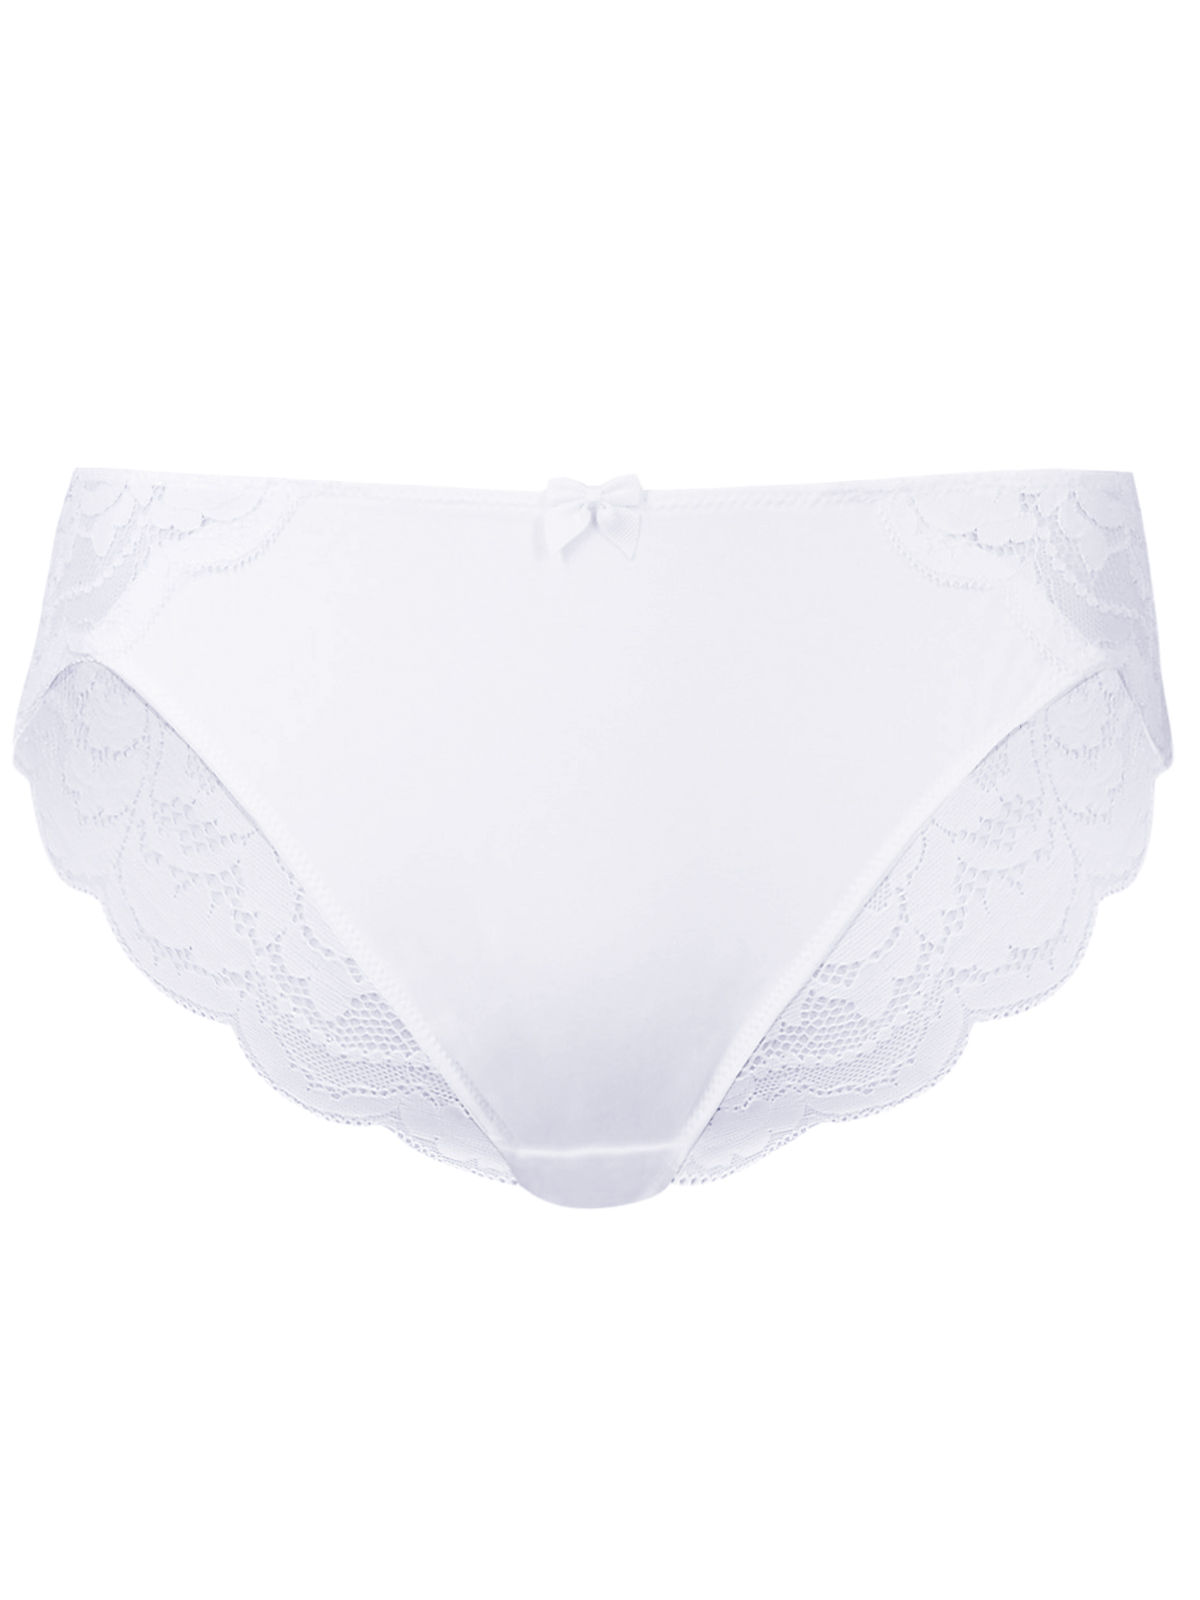 Marks and Spencer - - M&5 WHITE Ornate Lace High Leg Knickers - Size 10 ...